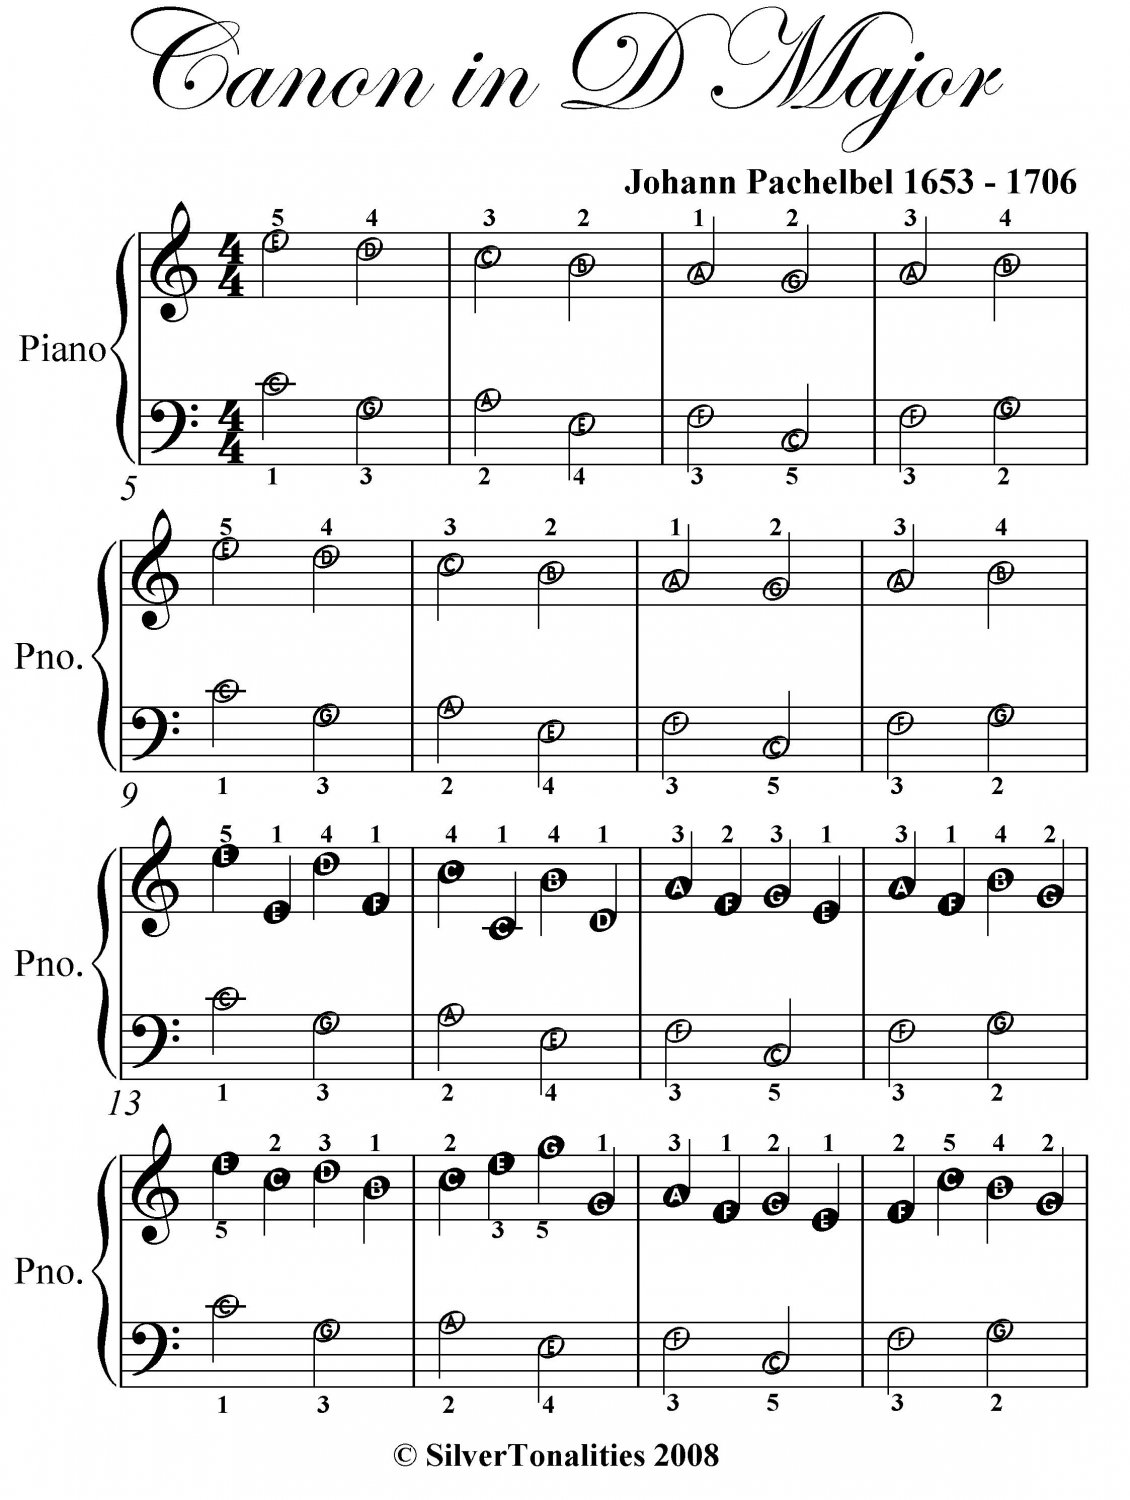 canon-in-d-easiest-piano-sheet-music-pdf